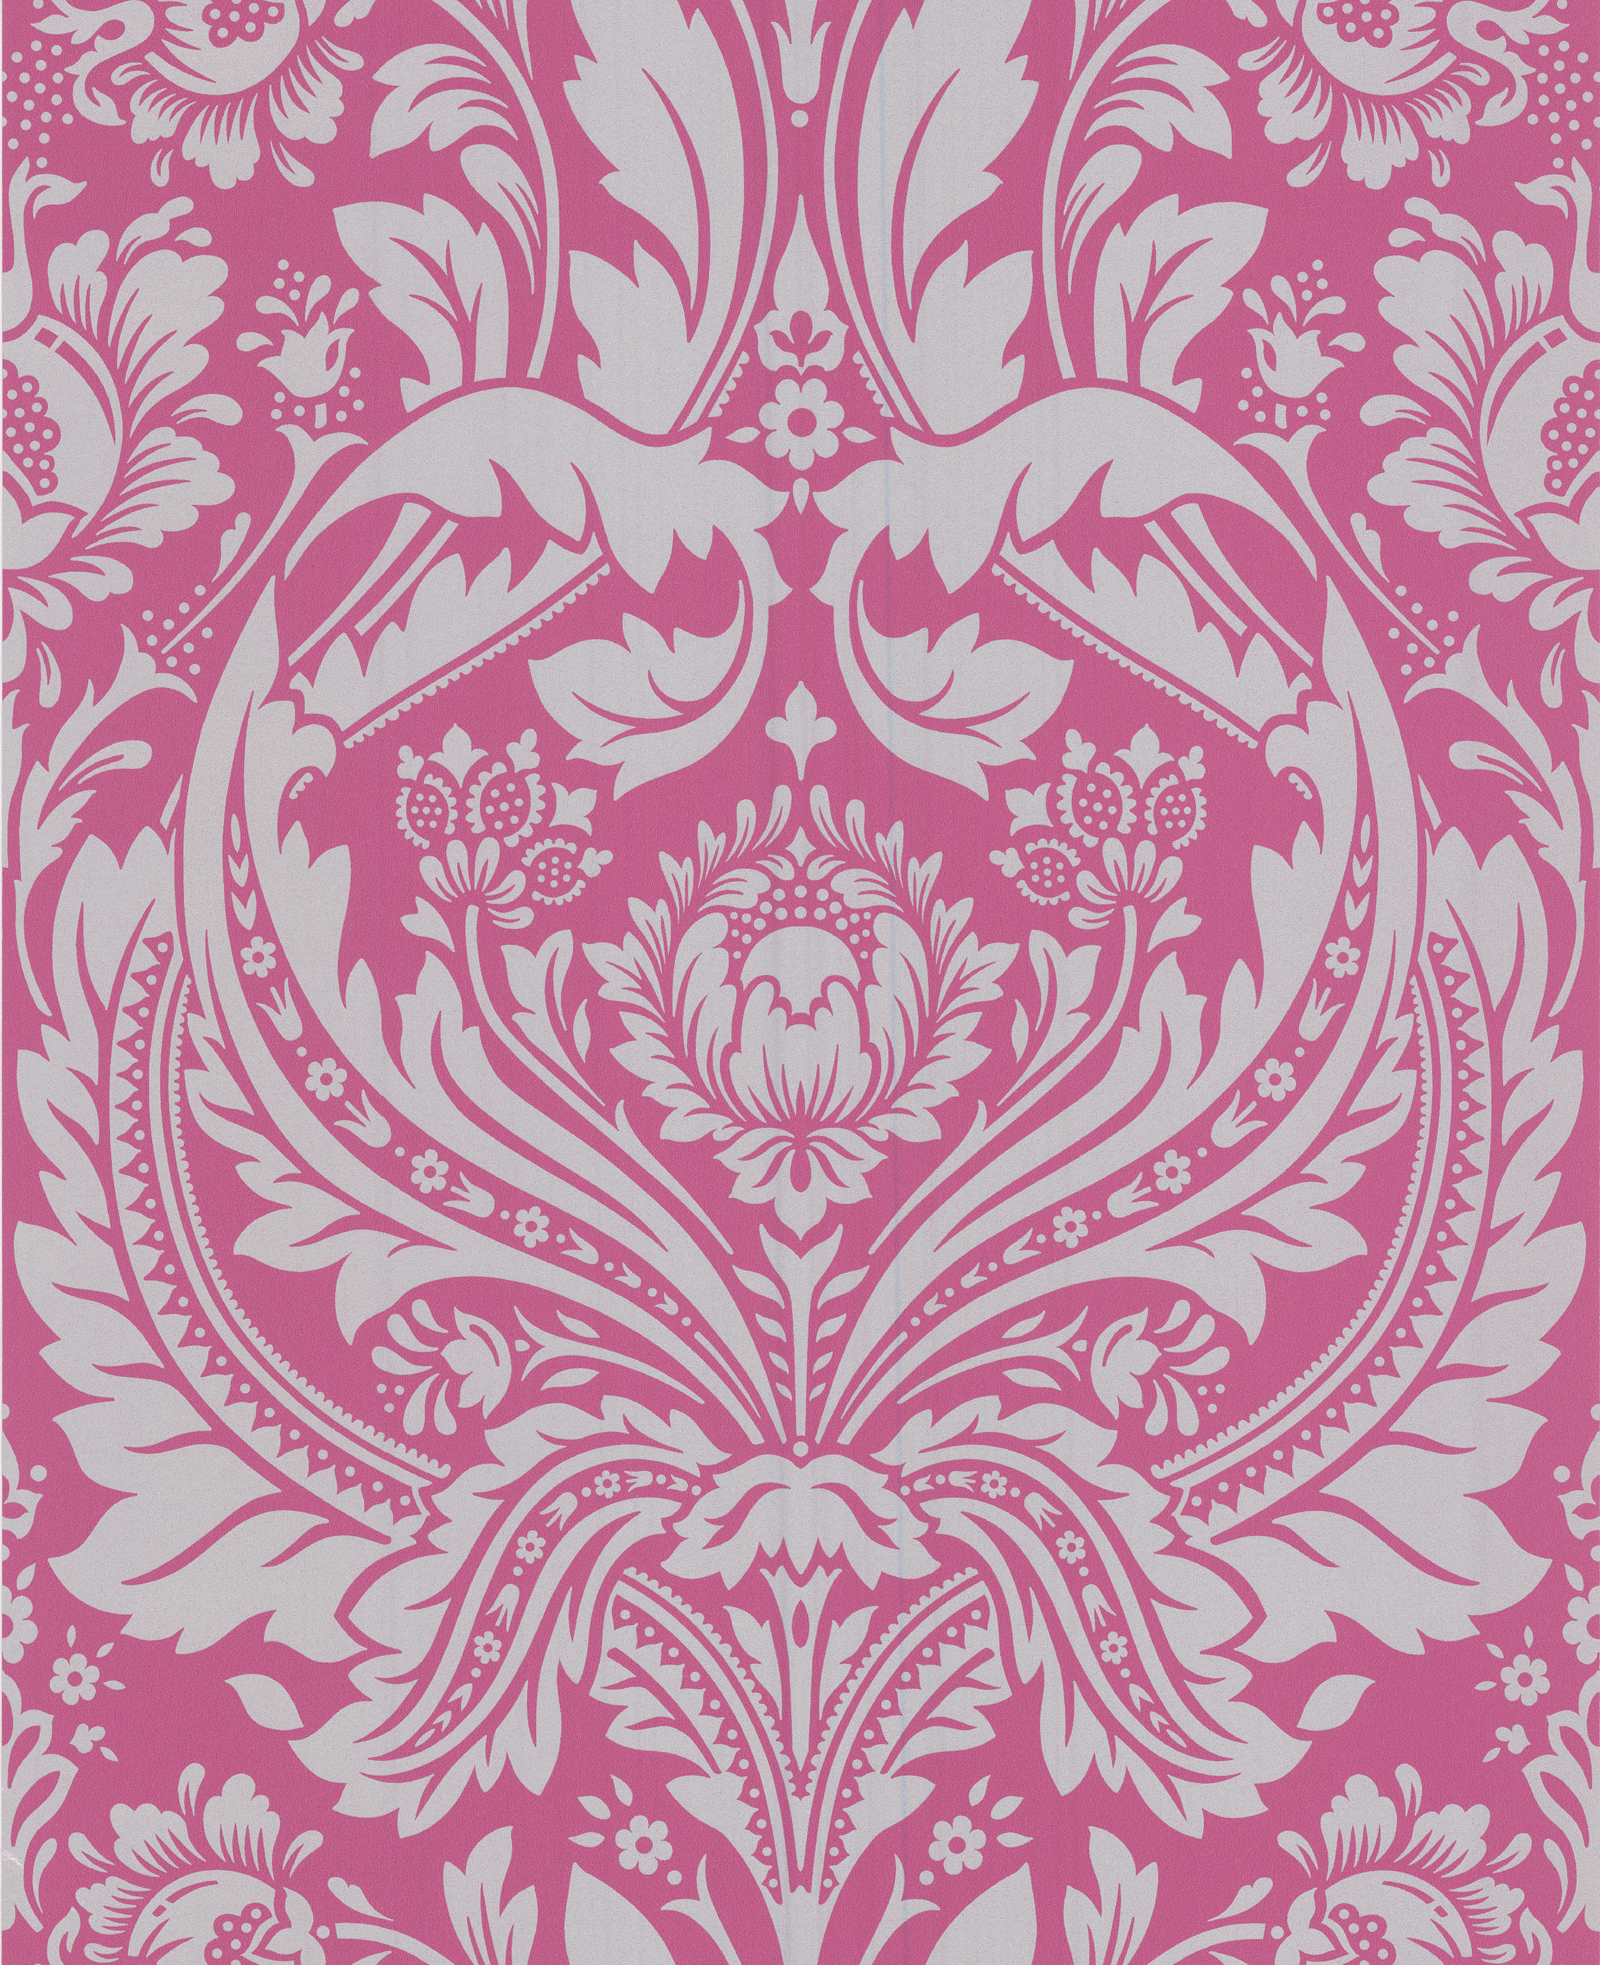 This Stunning Grand Damask Wallpaper In Pink And Grey Will Liven Up